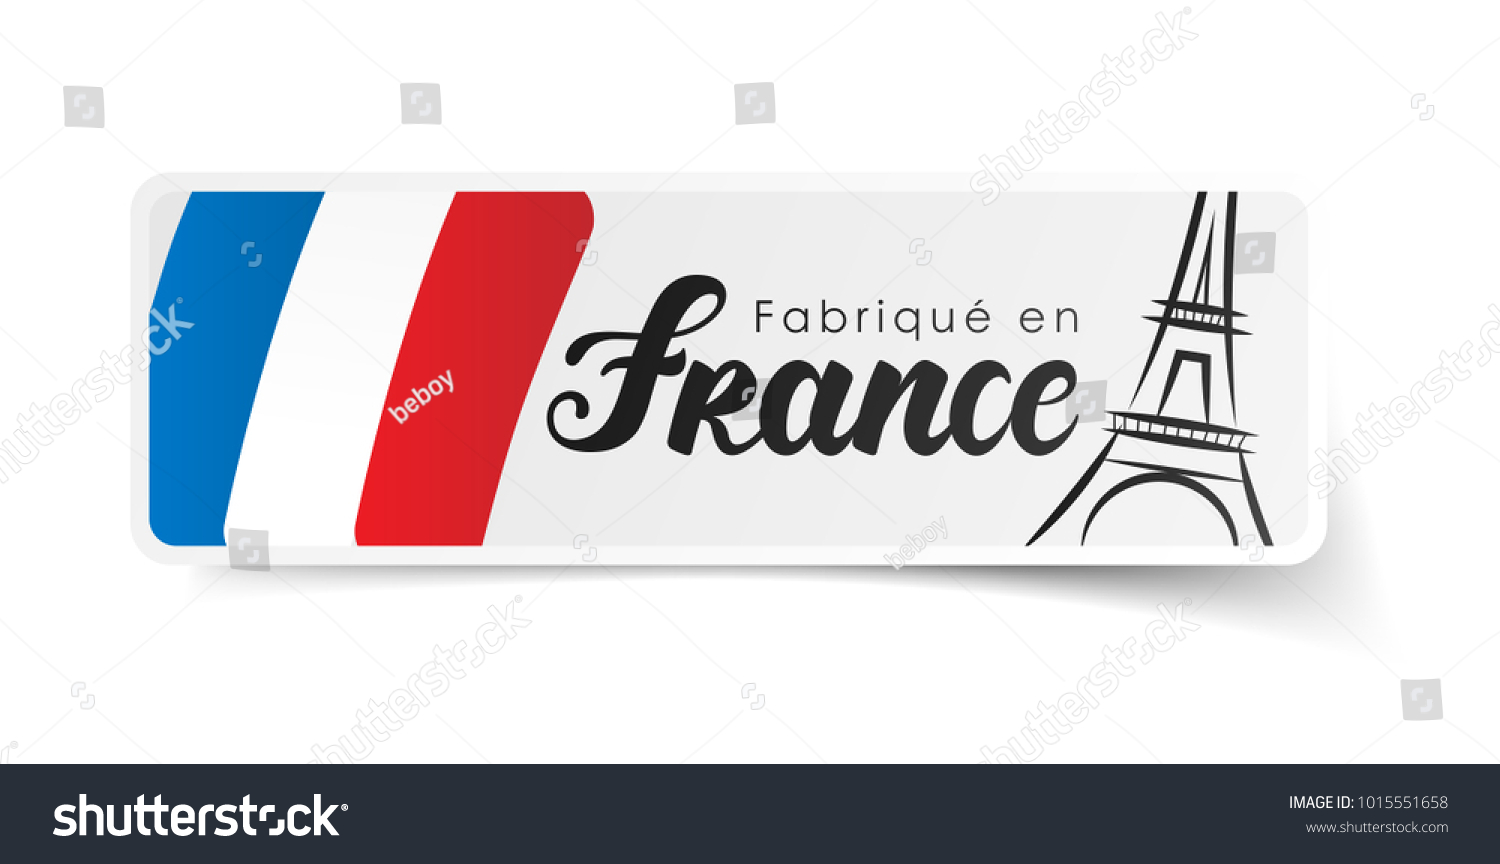 1,642 Logo made in france Images, Stock Photos & Vectors | Shutterstock